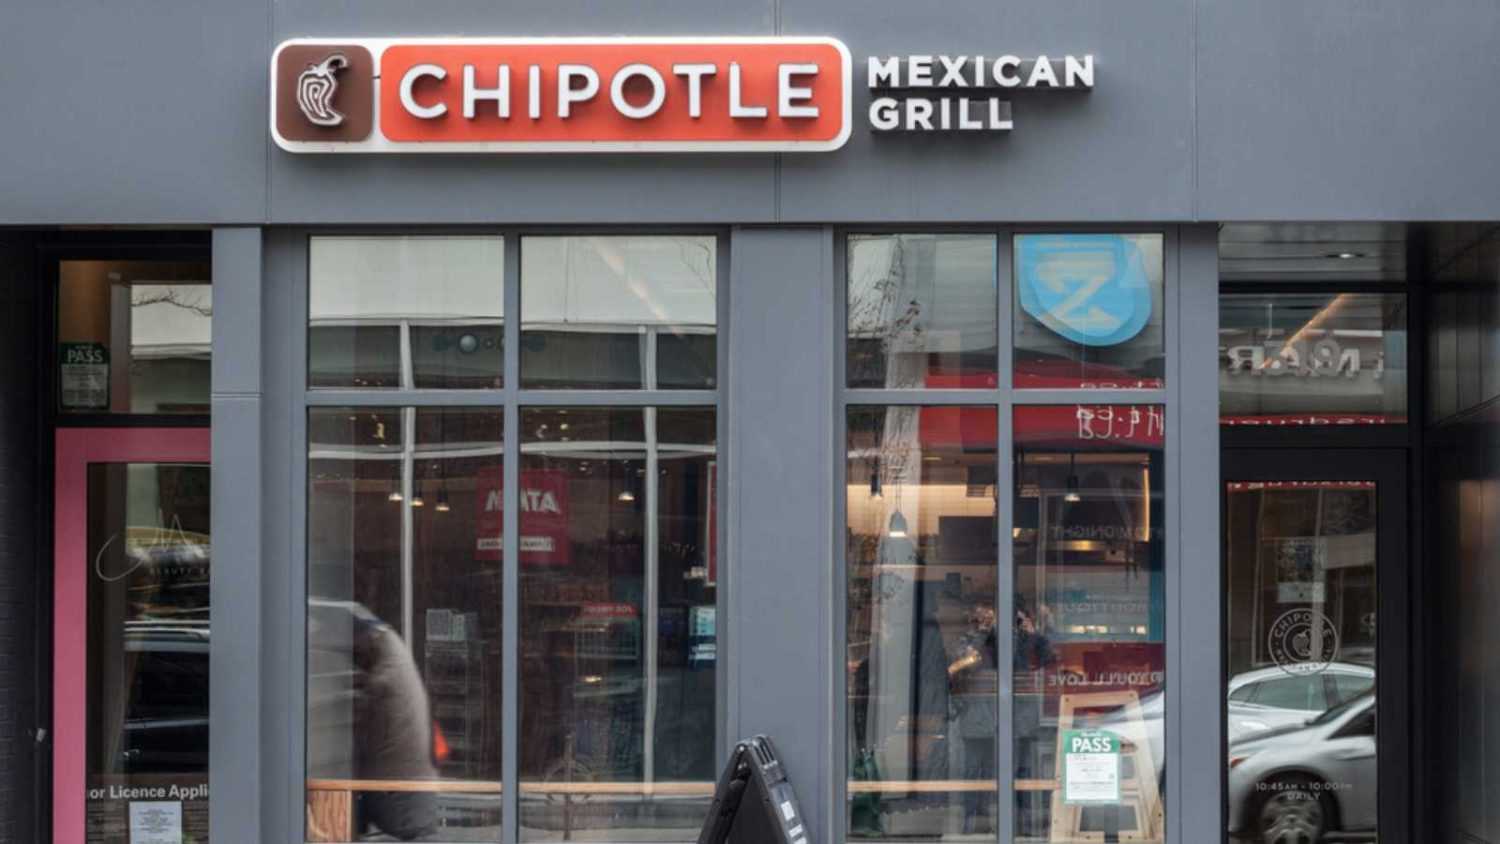 TORONTO, CANADA - NOVEMBER 13, 2018: Chipotle logo in front of their restaurant in Toronto, Ontario. Chipotle is an American fast food brand specialized in grill & Mexican food